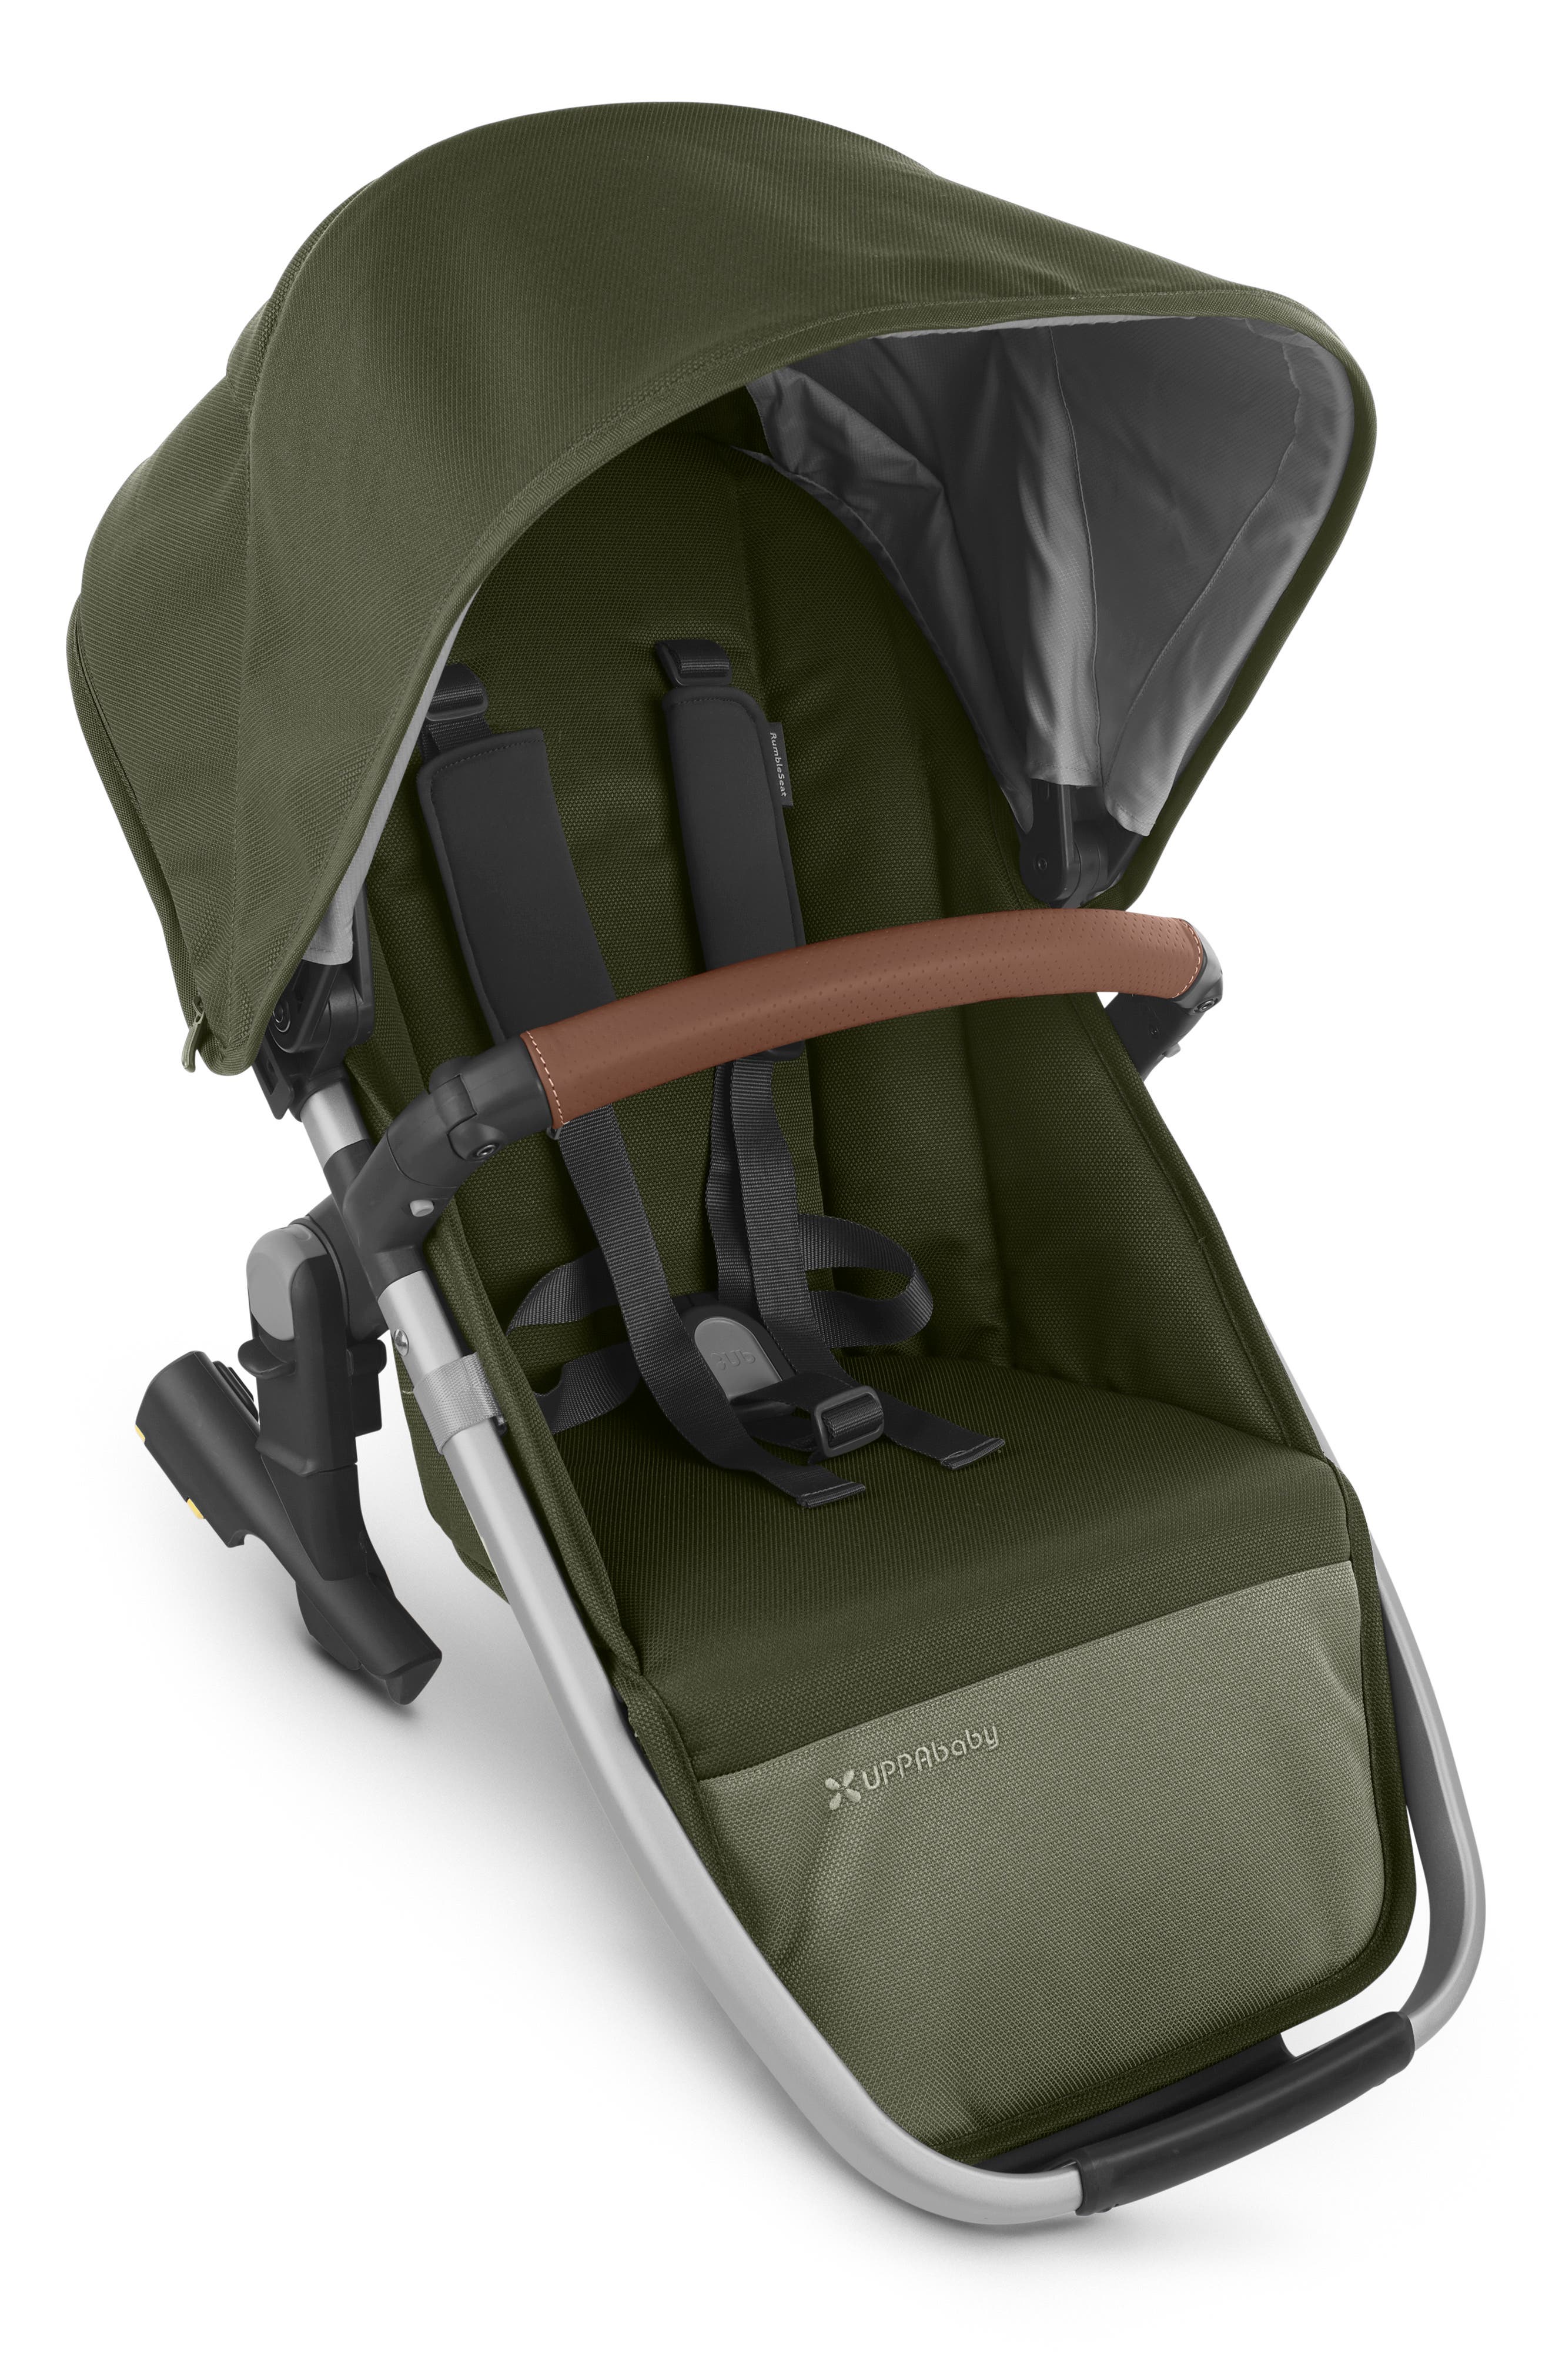 olive green car seat and stroller